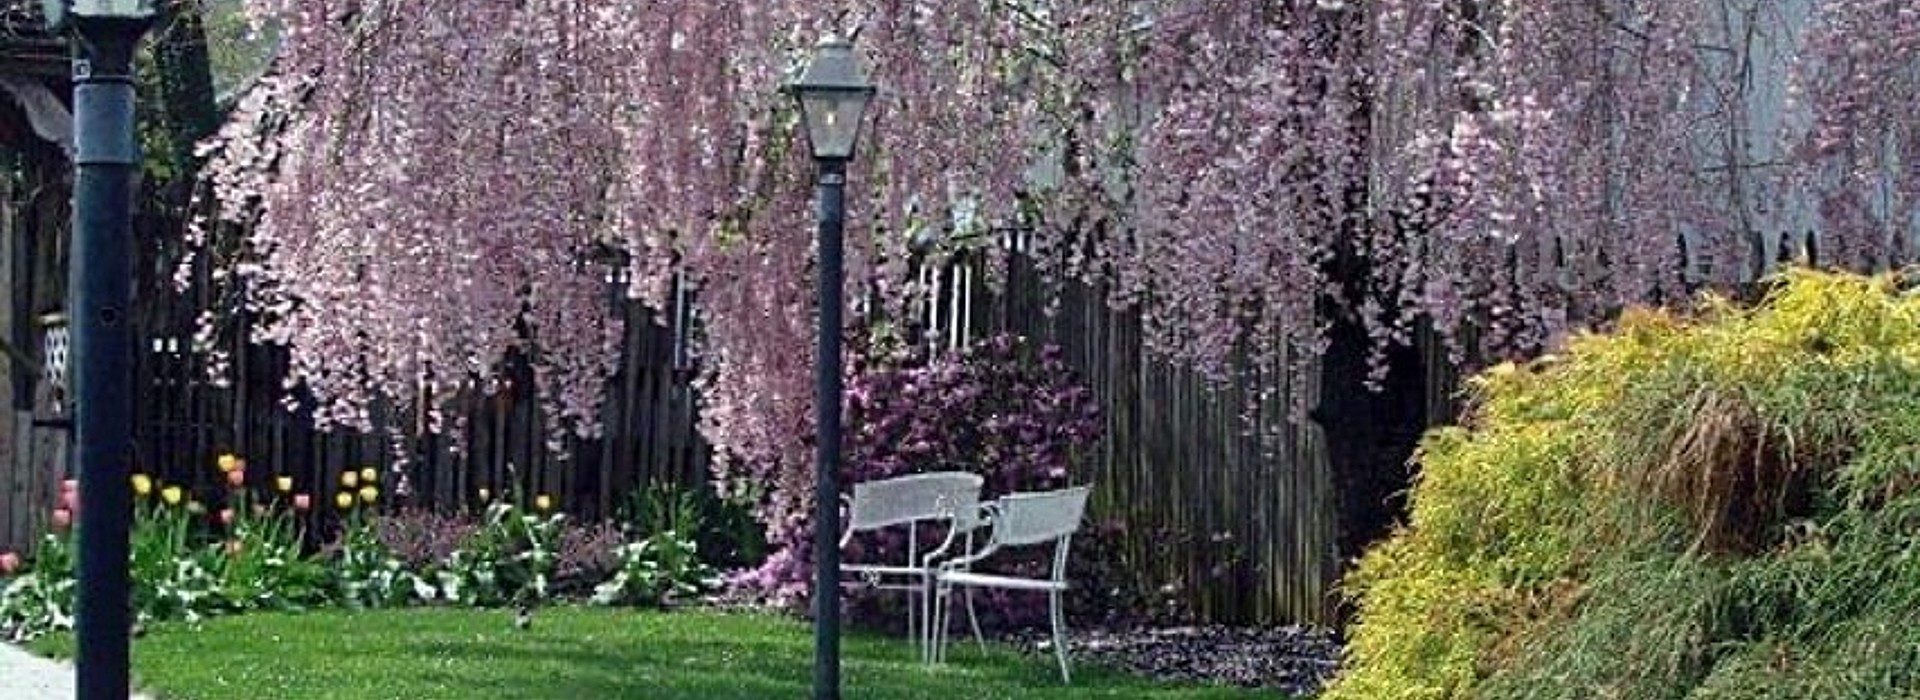 Blooming Weeping Willow tree full of pink buds over a grassy area with black lantern light posts